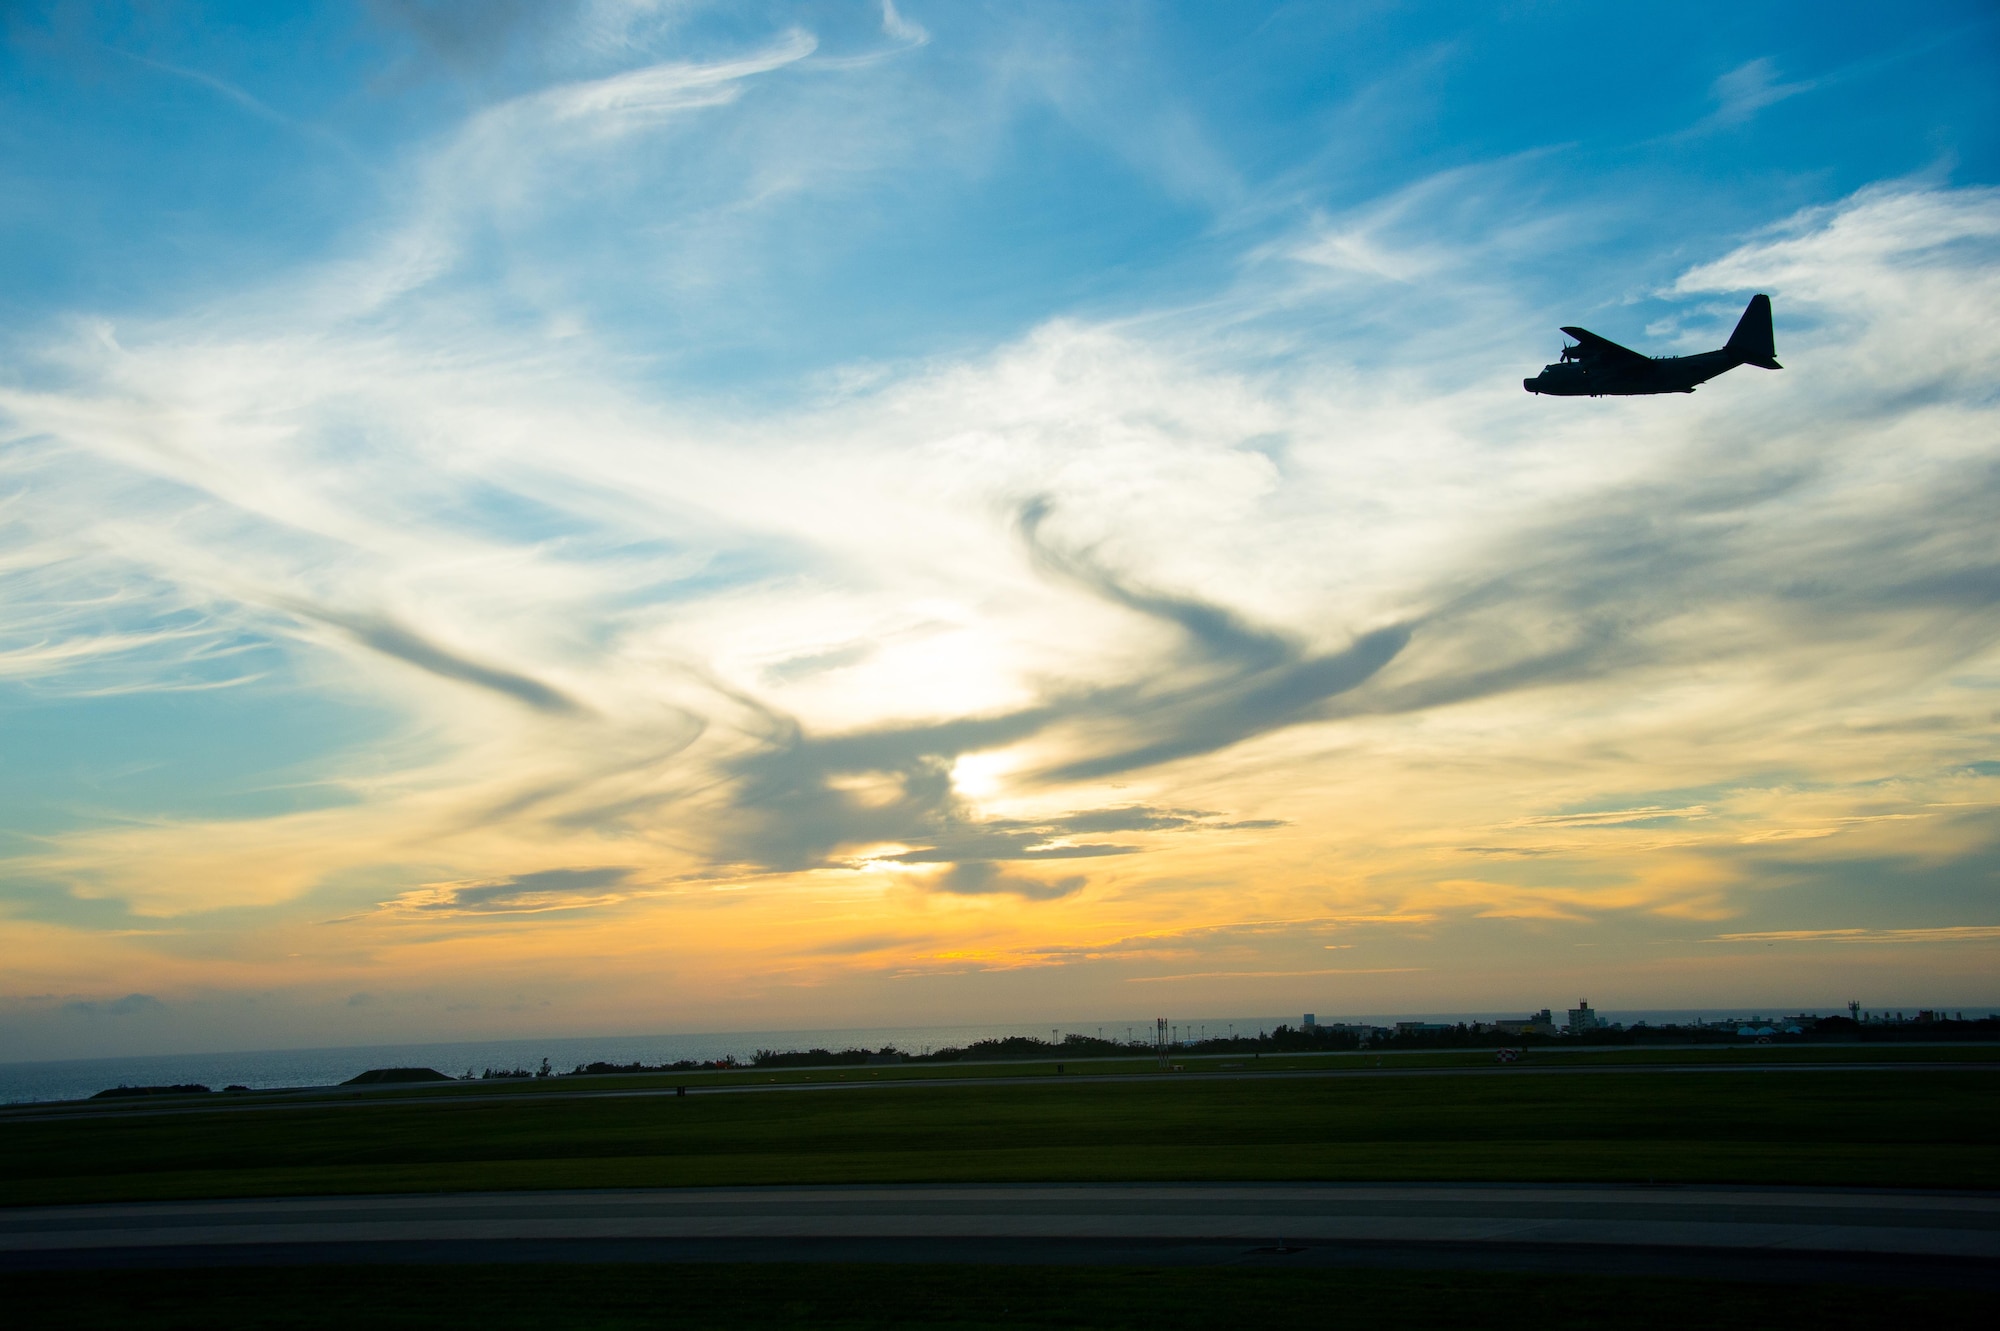 A U.S. Air Force MC-130H Combat Talon II from the 1st Special Operations Squadron takes off from the Kadena Air Base, Japan, flightline May 14, 2015. The 1st Special Operations Squadron operates the MC-130H providing infiltration, exfiltration, and resupply of special operations forces and equipment in hostile or denied territory.  The 1st Special Operations Squadron is one of five squadrons that make up the 353rd Special Operations Group.  As the only Air Force special operations group in the Pacific, they are the focal point for Air Force special operations activities throughout the United States Pacific Command Theater. (U.S. Air Force photo by Airman 1st Class Tyler Woodward)